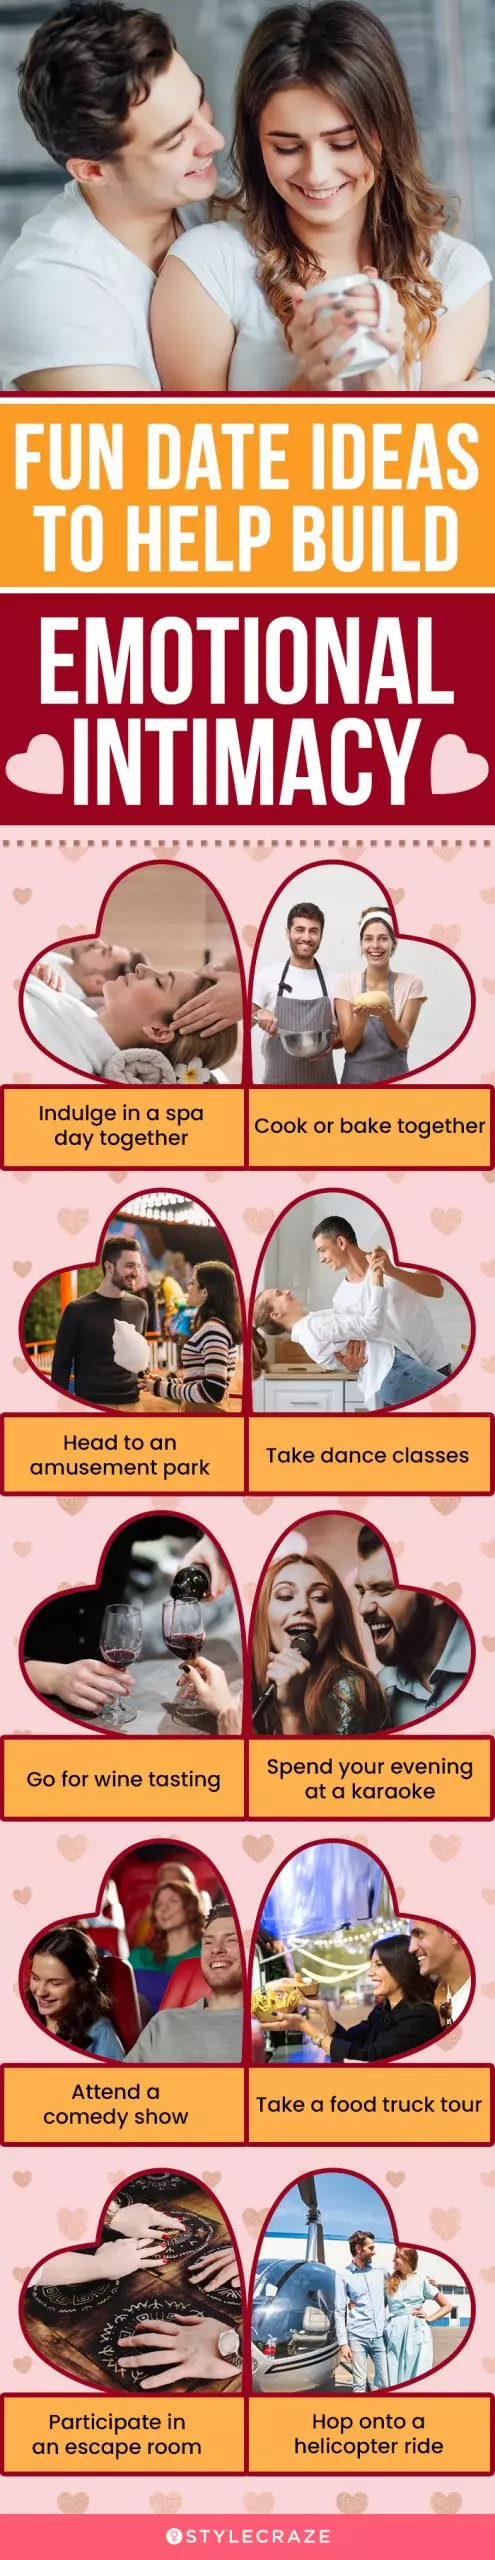 fun date ideas to help build emotional intimacy (infographic)